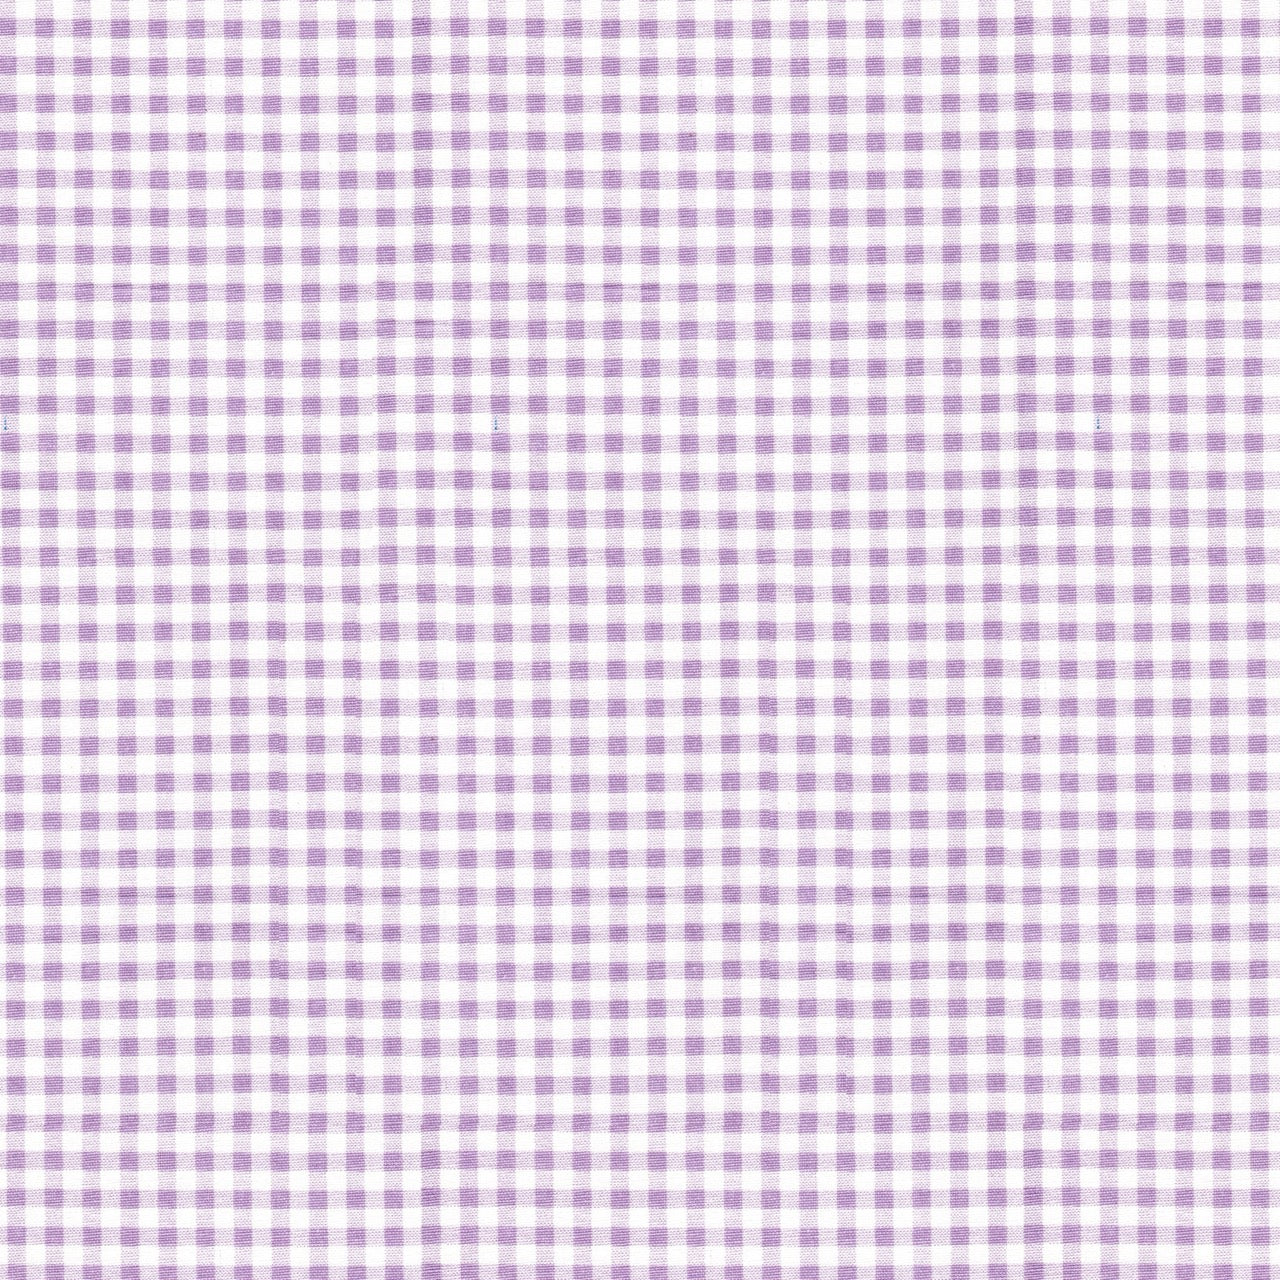 Tailored Bedskirt in Orchid Large Gingham Check on White